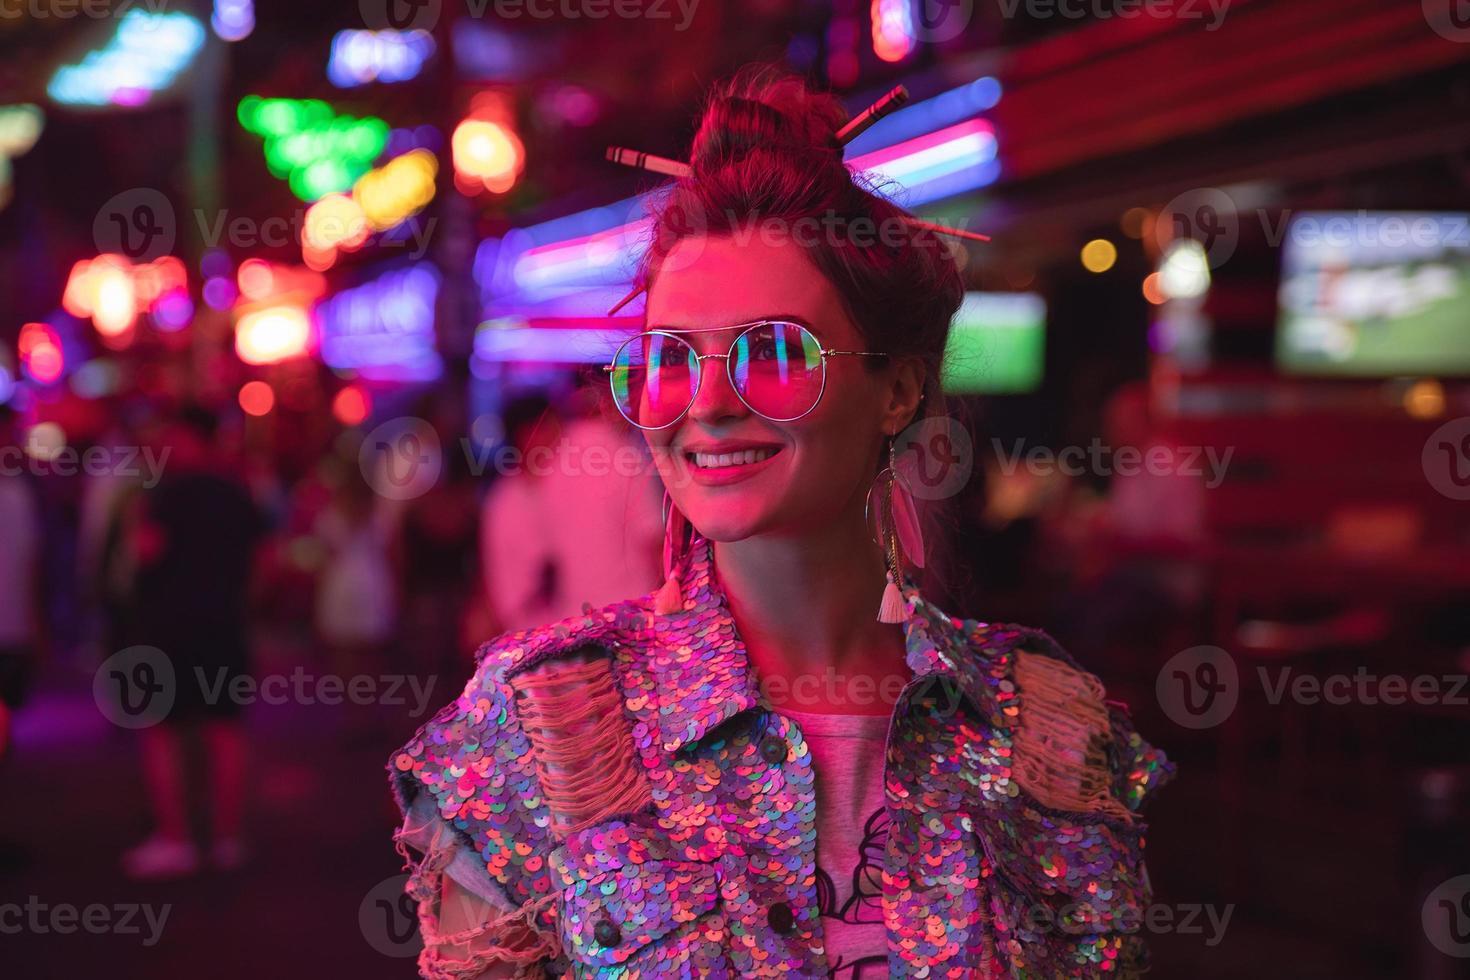 Stylish woman wearing jacket with shining sequins on the city street with neon lights photo